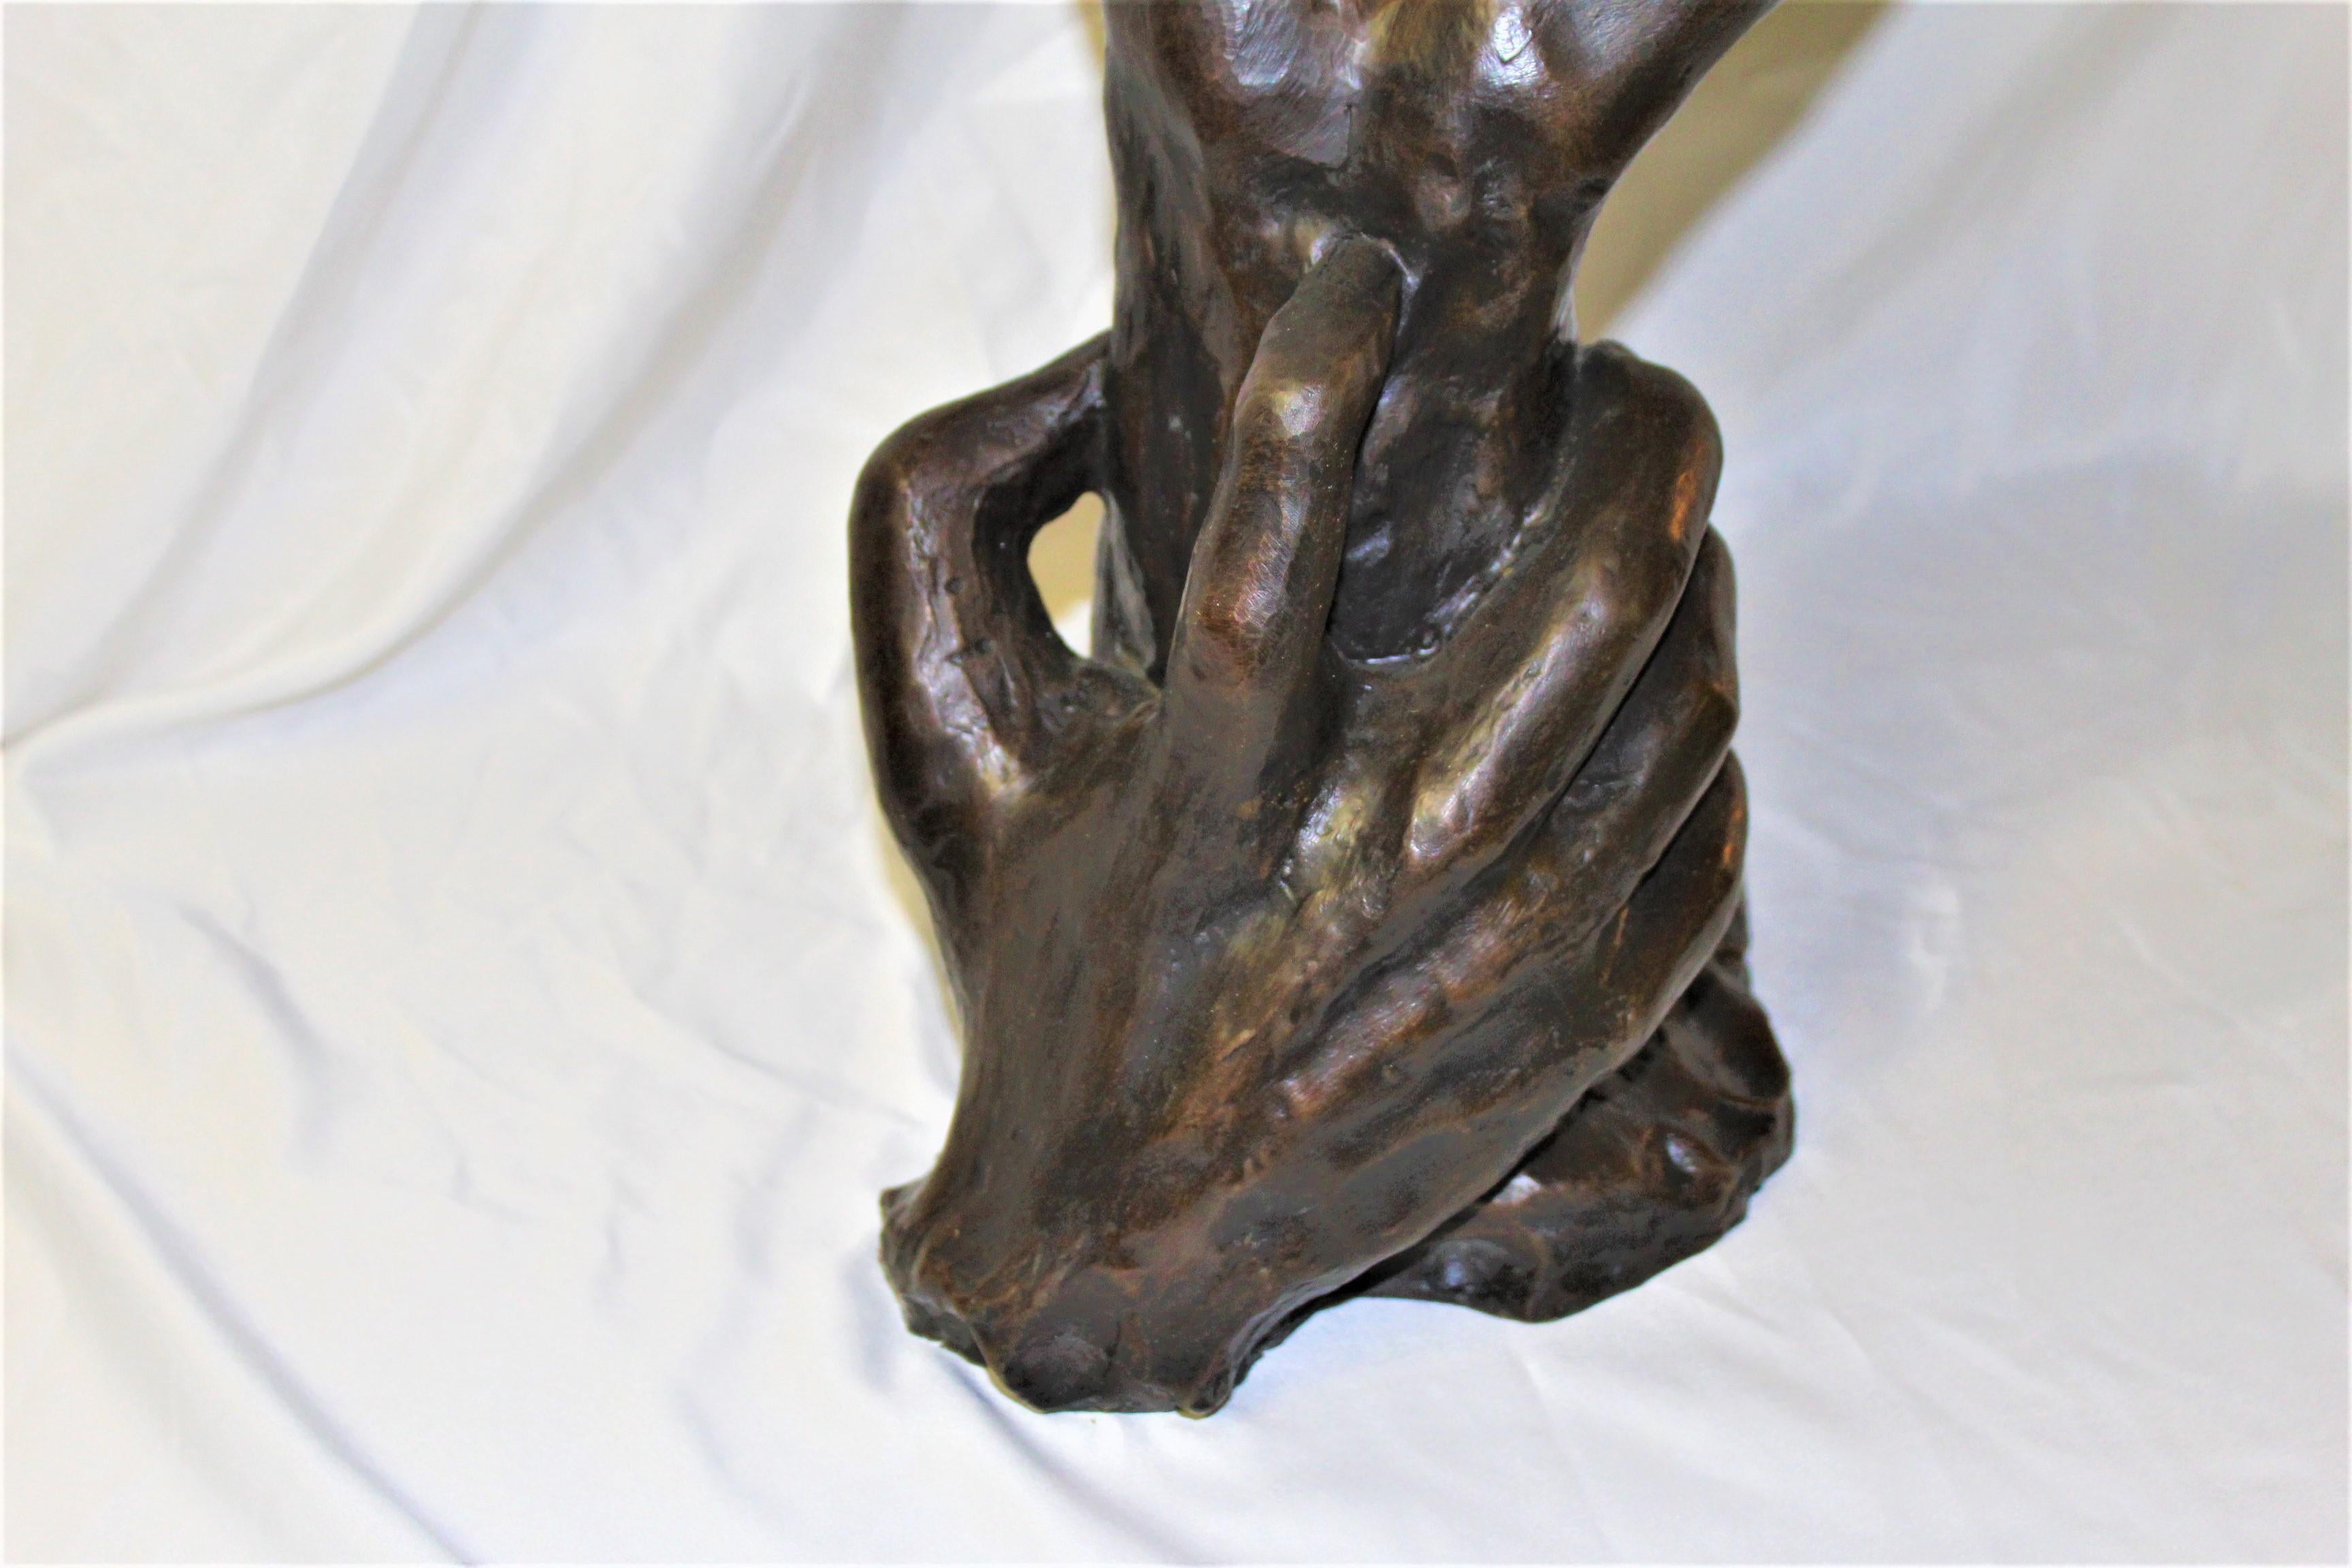 Larger than life-size sculpture of Hands in stress made from a rare find > One of his most popular sculptures. Lost wax process and with excellent bronze color patina finish. Heavy casting and showing a signature at the bottom. In the style of